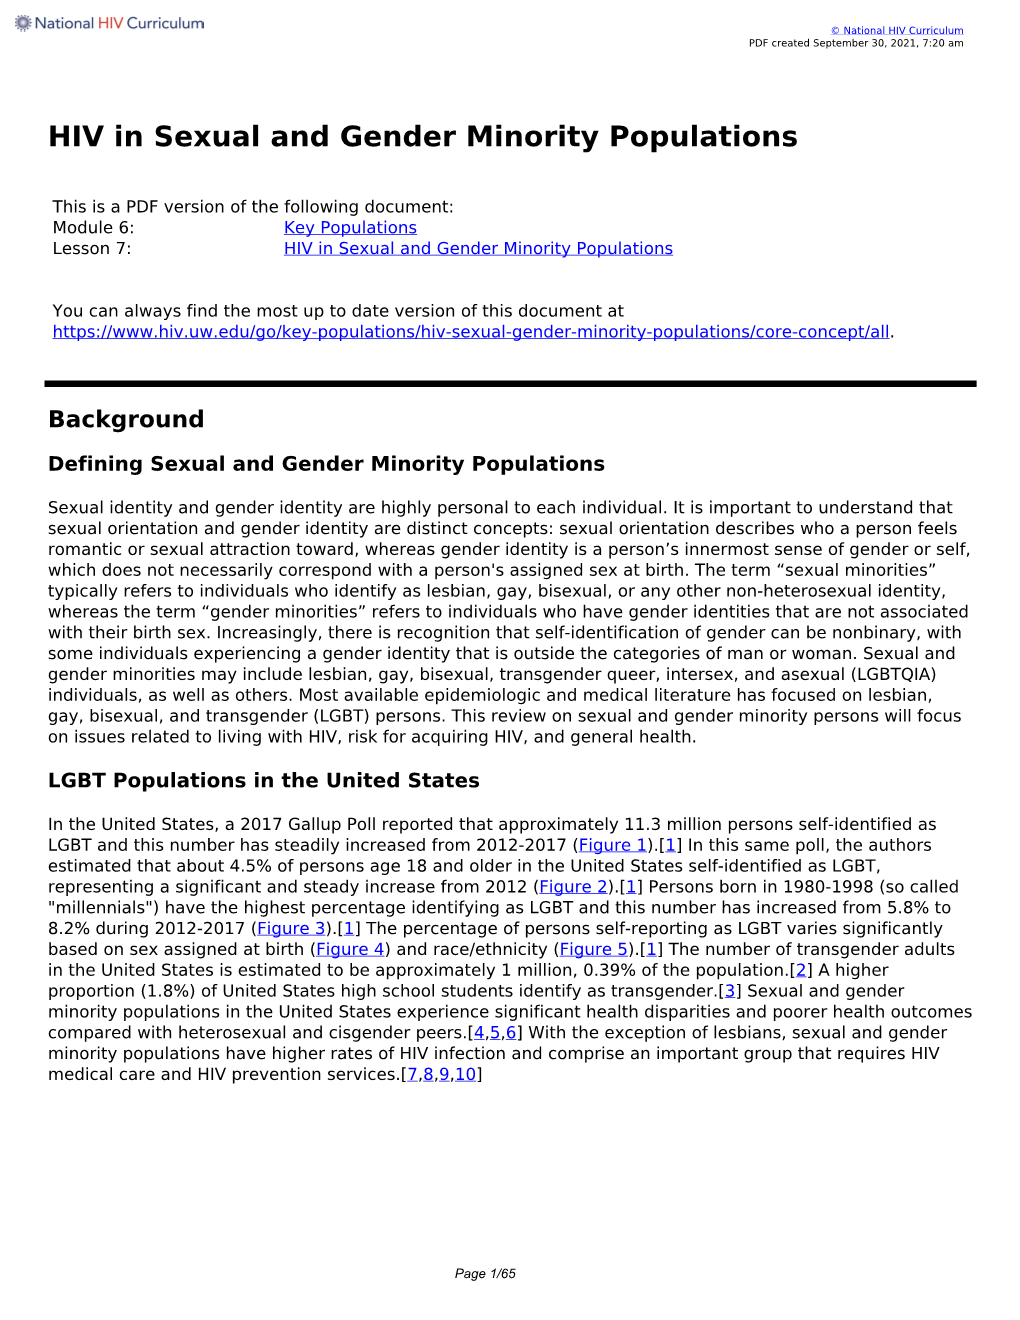 HIV in Sexual and Gender Minority Populations